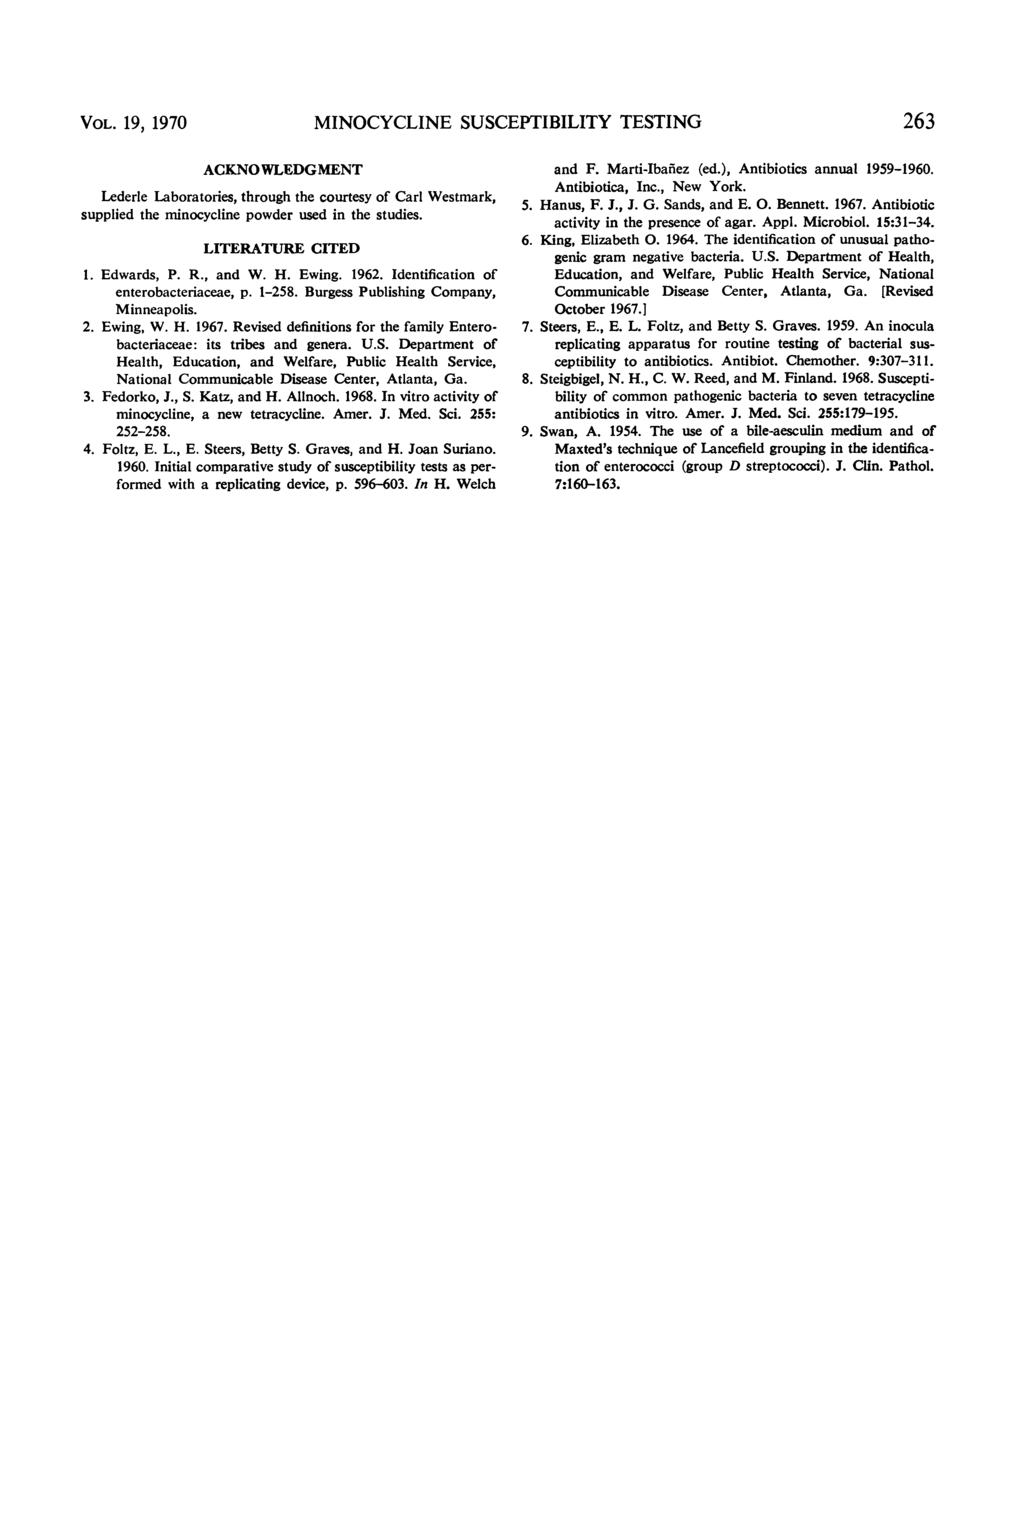 VOL. 19, 1970 MINOCYCLINE SUSCEPTIBILITY TESTING 263 ACKNOWLEDGMENT Lederle Laboratories, through the courtesy of Carl Westmark, supplied the minocycline powder used in the studies.